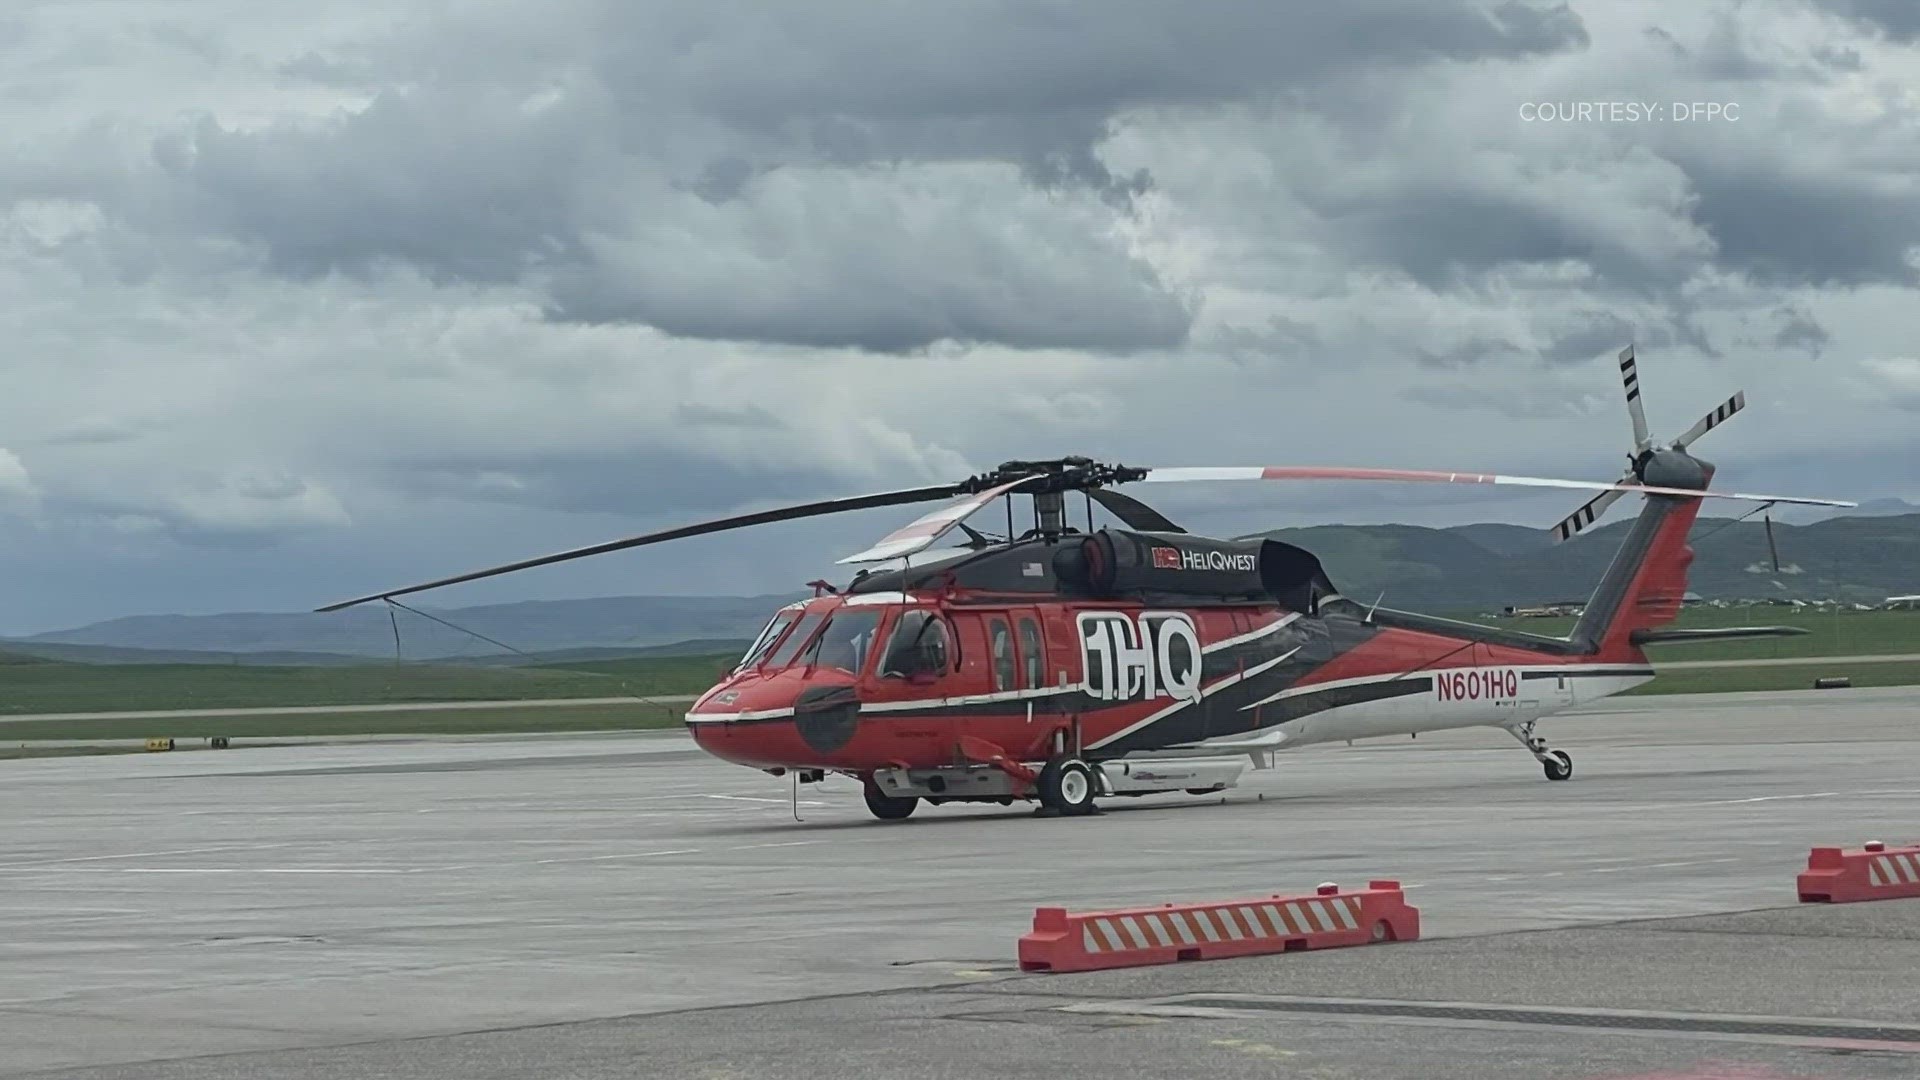 A Sikorsky UH-60A Black Hawk, able to carry 9,000 pound water drops, will park on the tarmac of the Yampa airport, on-call for statewide emergencies.